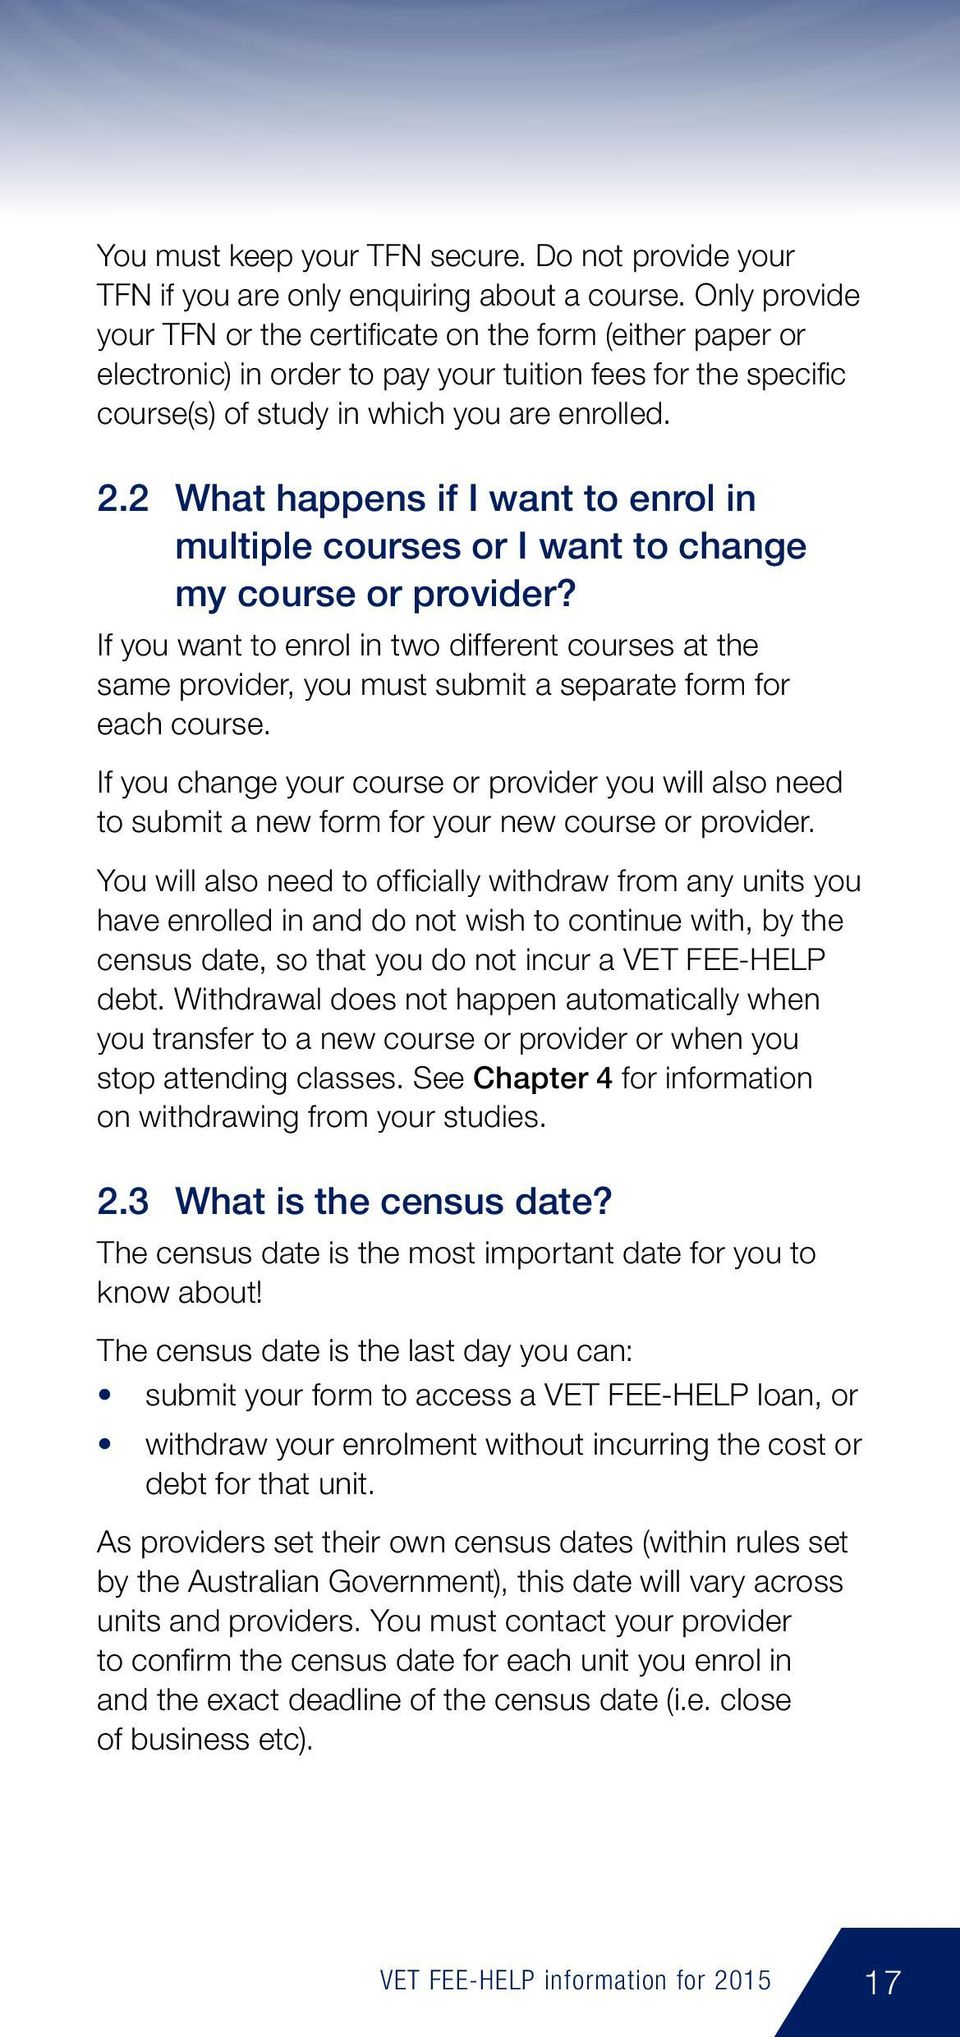 2 What happens if I want to enrol in multiple courses or I want to change my course or provider?